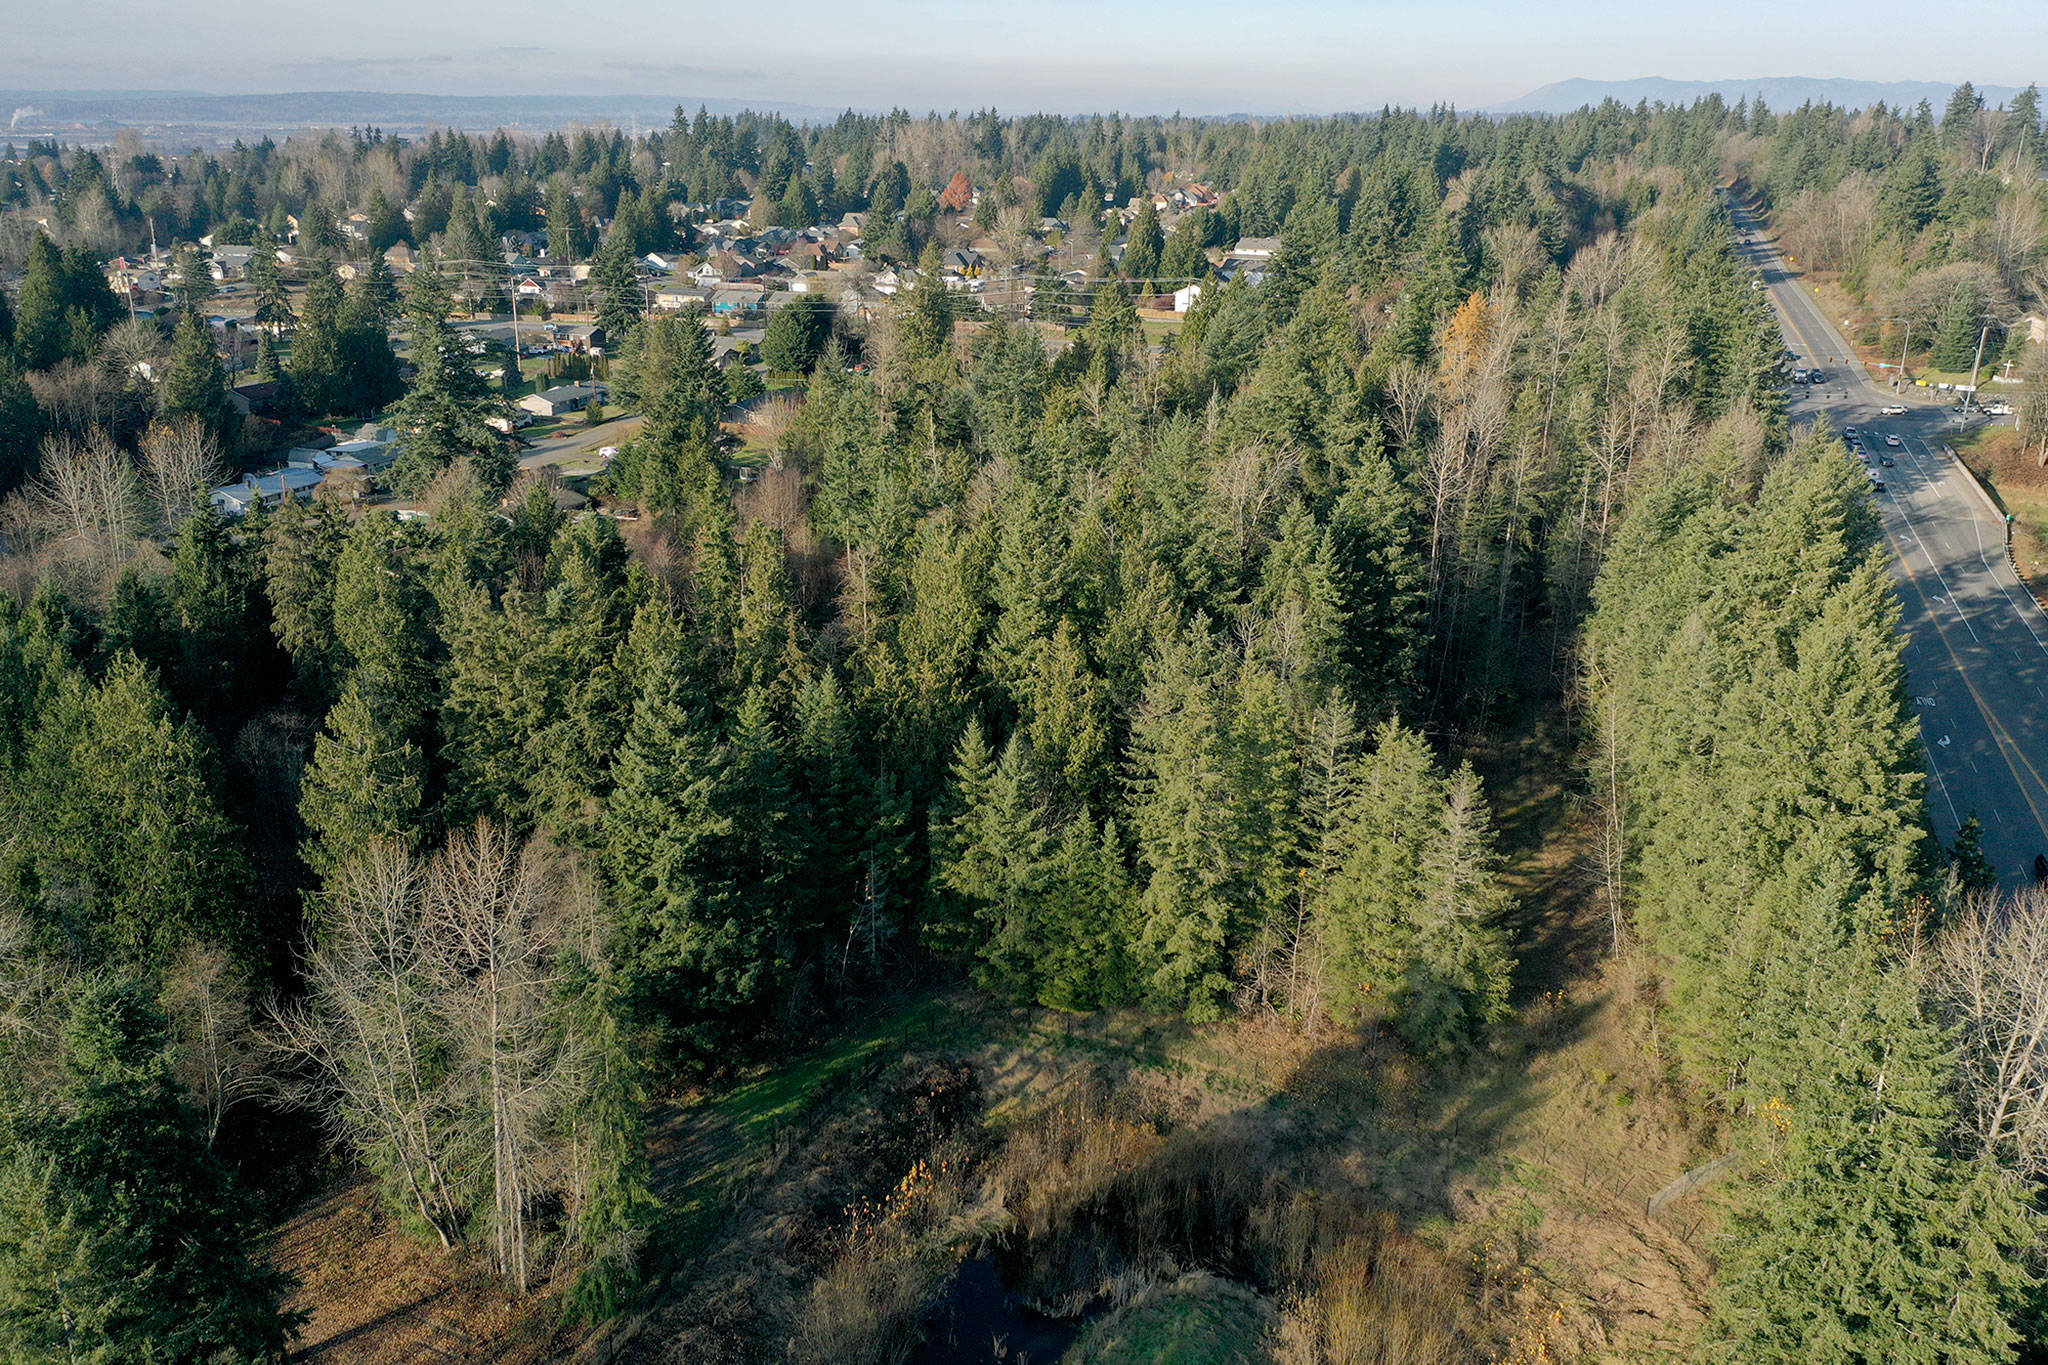 A portion of the site of the proposed Lake Stevens Costco at the intersection of Highway 9 (right) and South Lake Stevens Road (below, out of view). (Chuck Taylor / The Herald)                                A portion of the site of the proposed Lake Stevens Costco at the intersection of Highway 9 (right) and South Lake Stevens Road (below, out of view). (Chuck Taylor / The Herald)